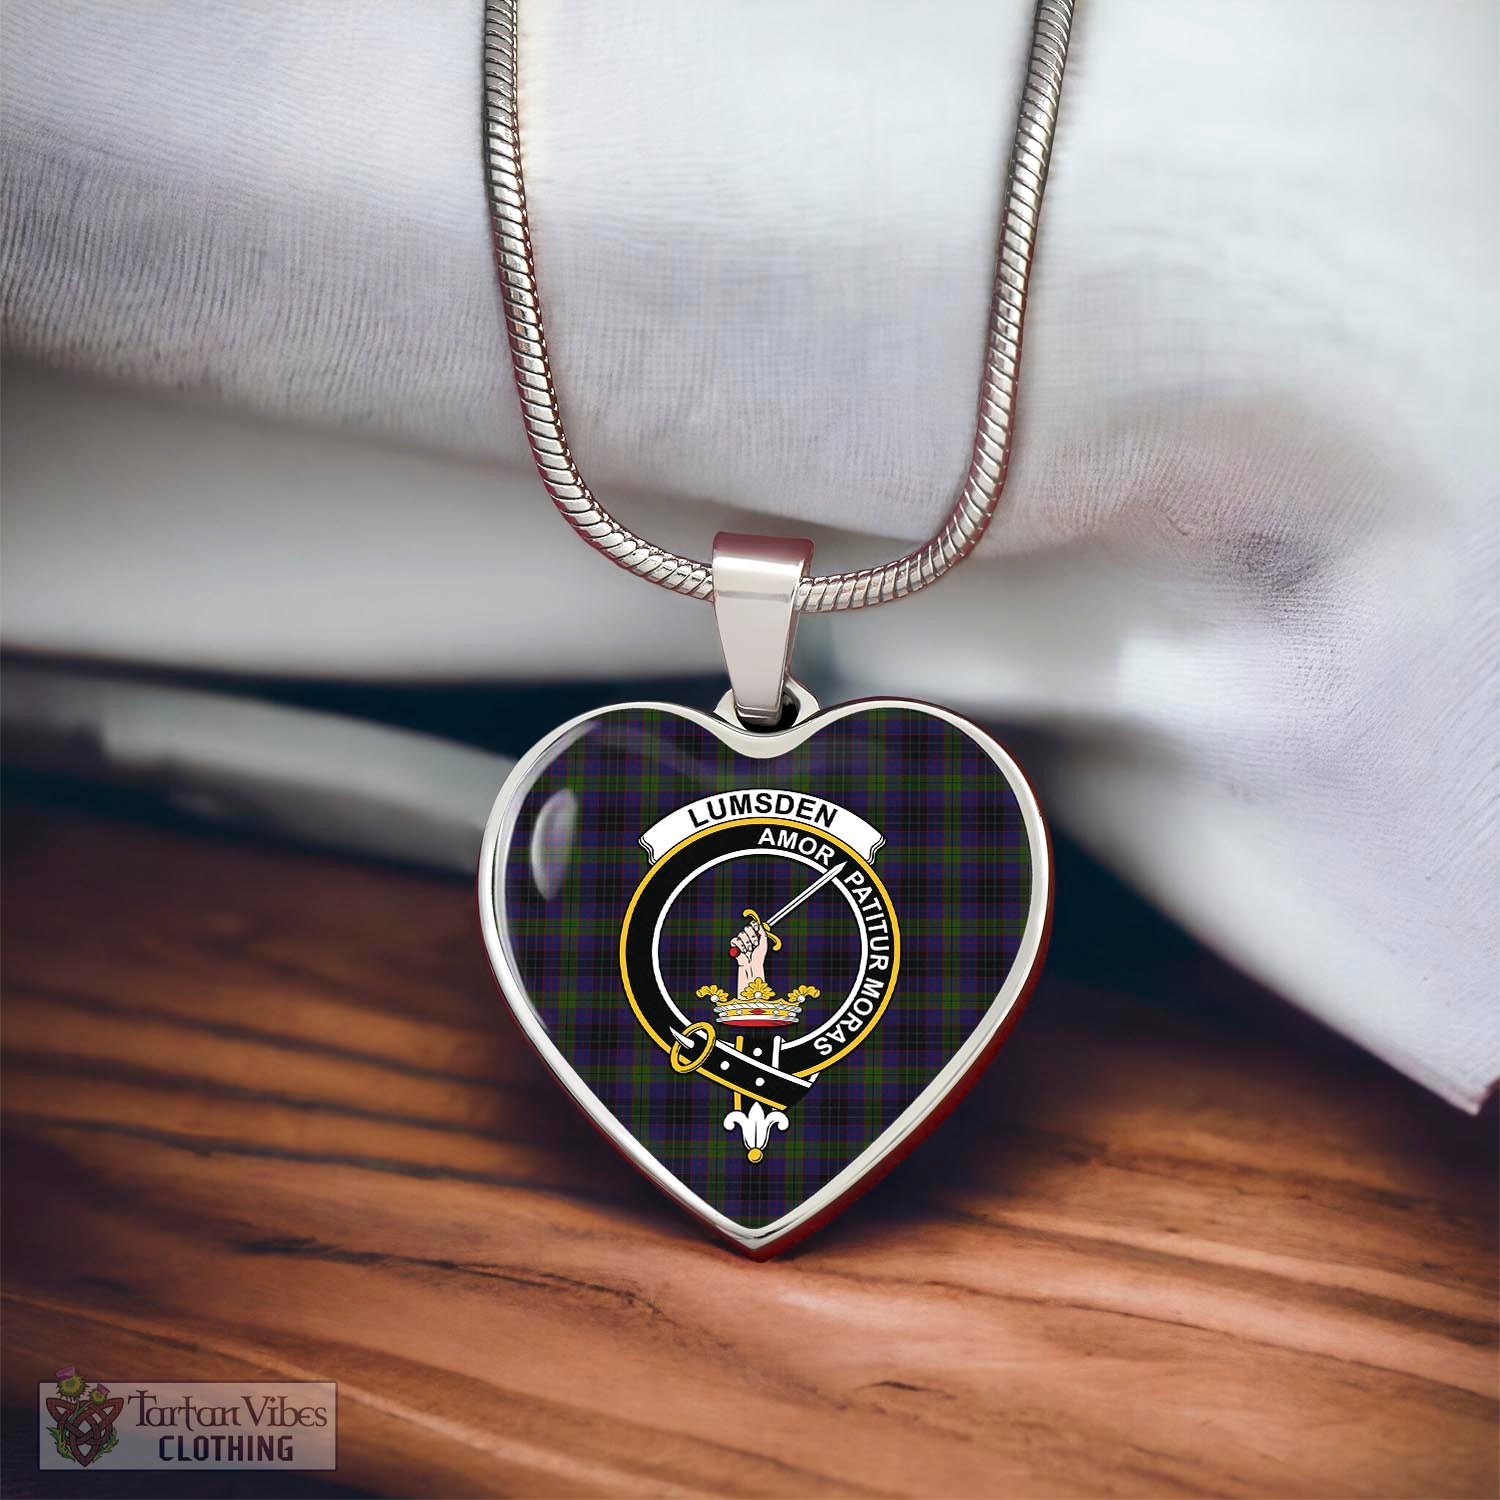 Tartan Vibes Clothing Lumsden Hunting Tartan Heart Necklace with Family Crest